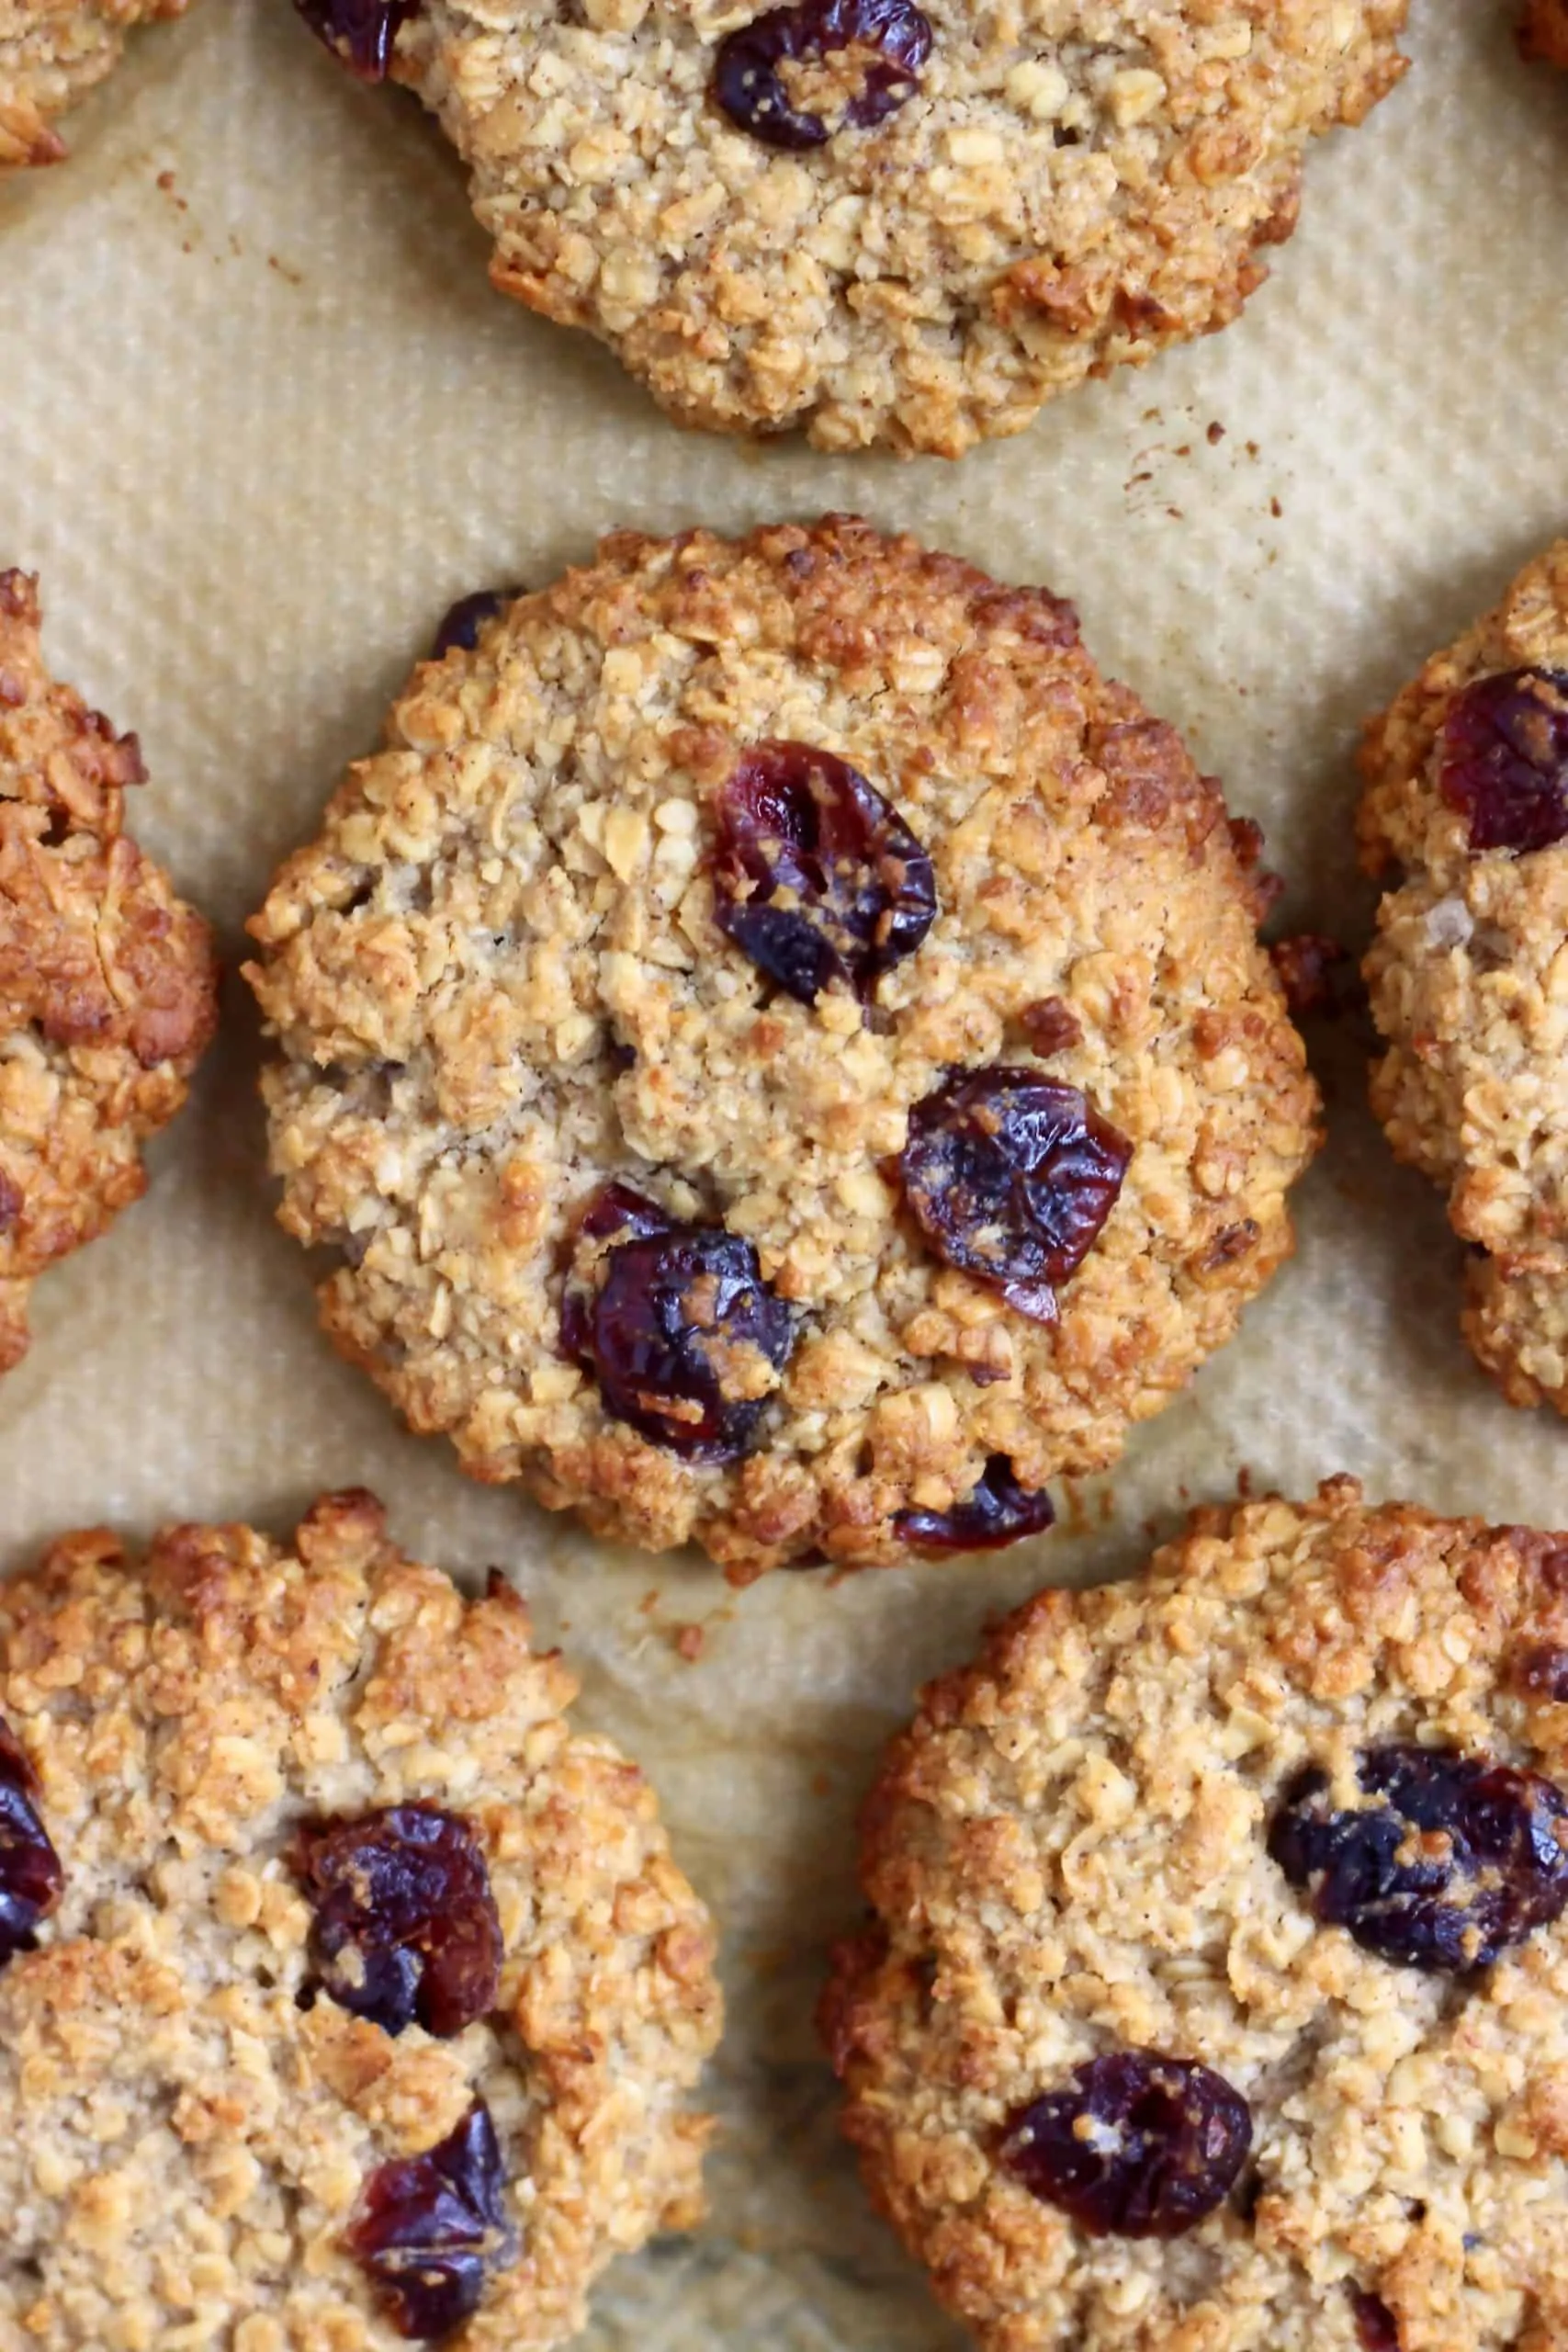 Four oatmeal cookies with dried cranberries